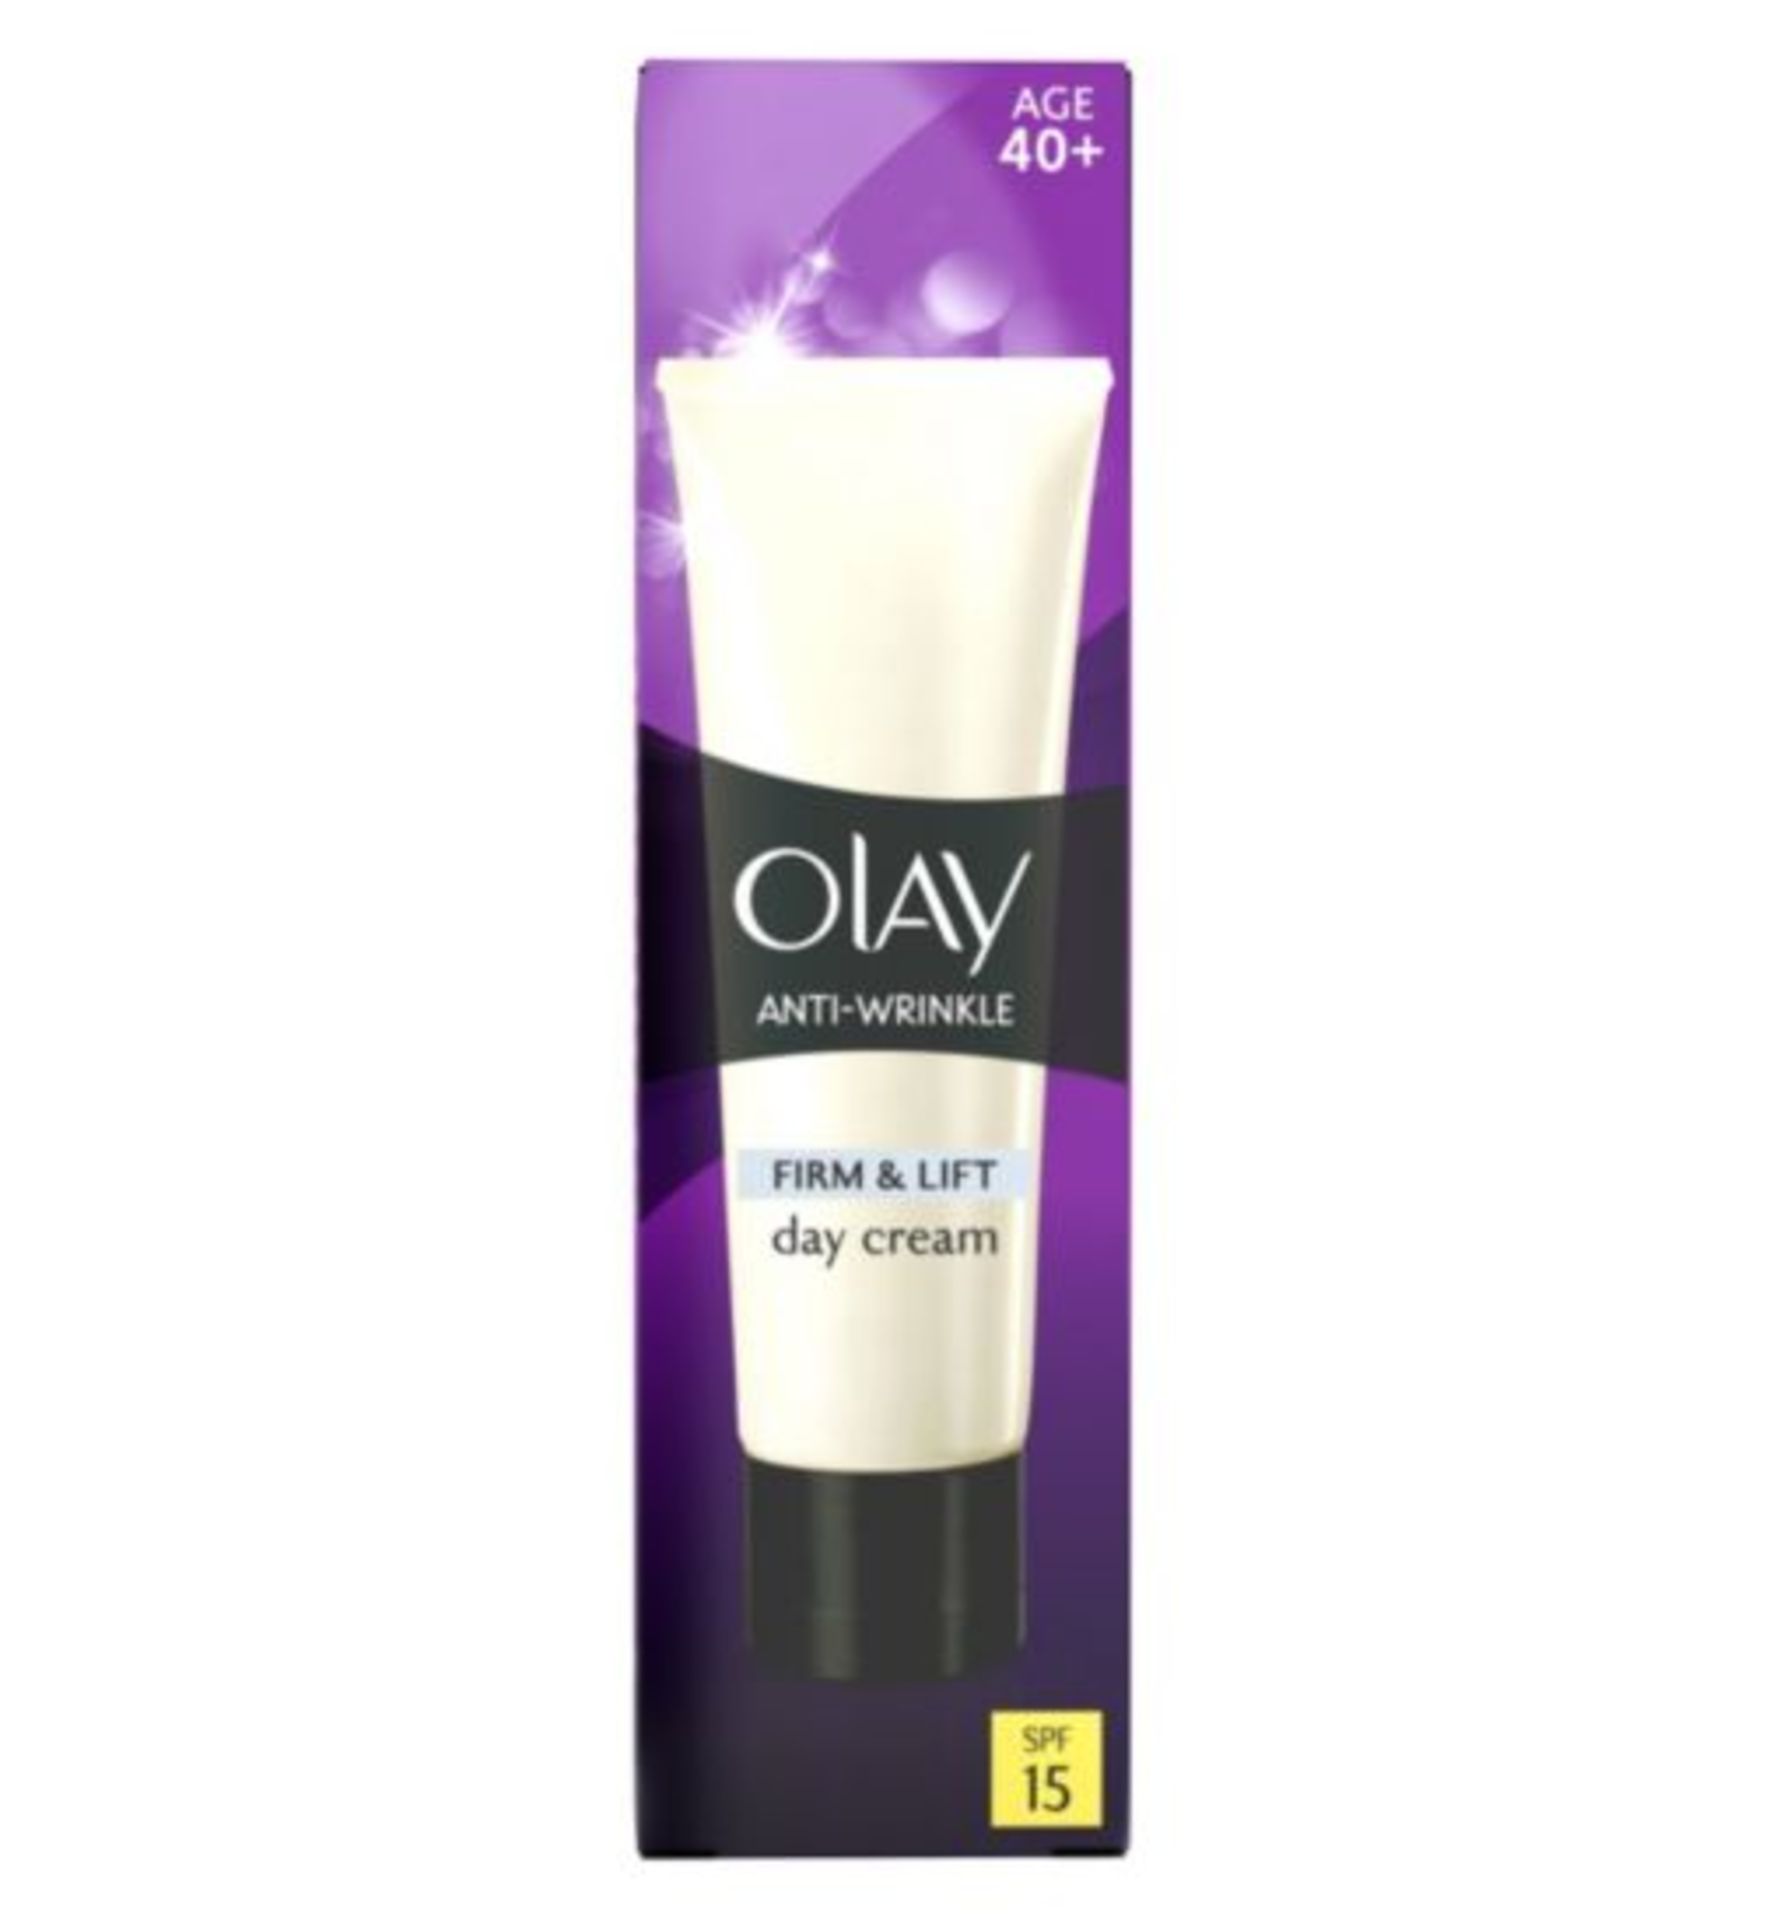 V  Grade A Olay Anti-Wrinkle firm and lift day cream SPF 15 Aged 40+ X  2  Bid price to be